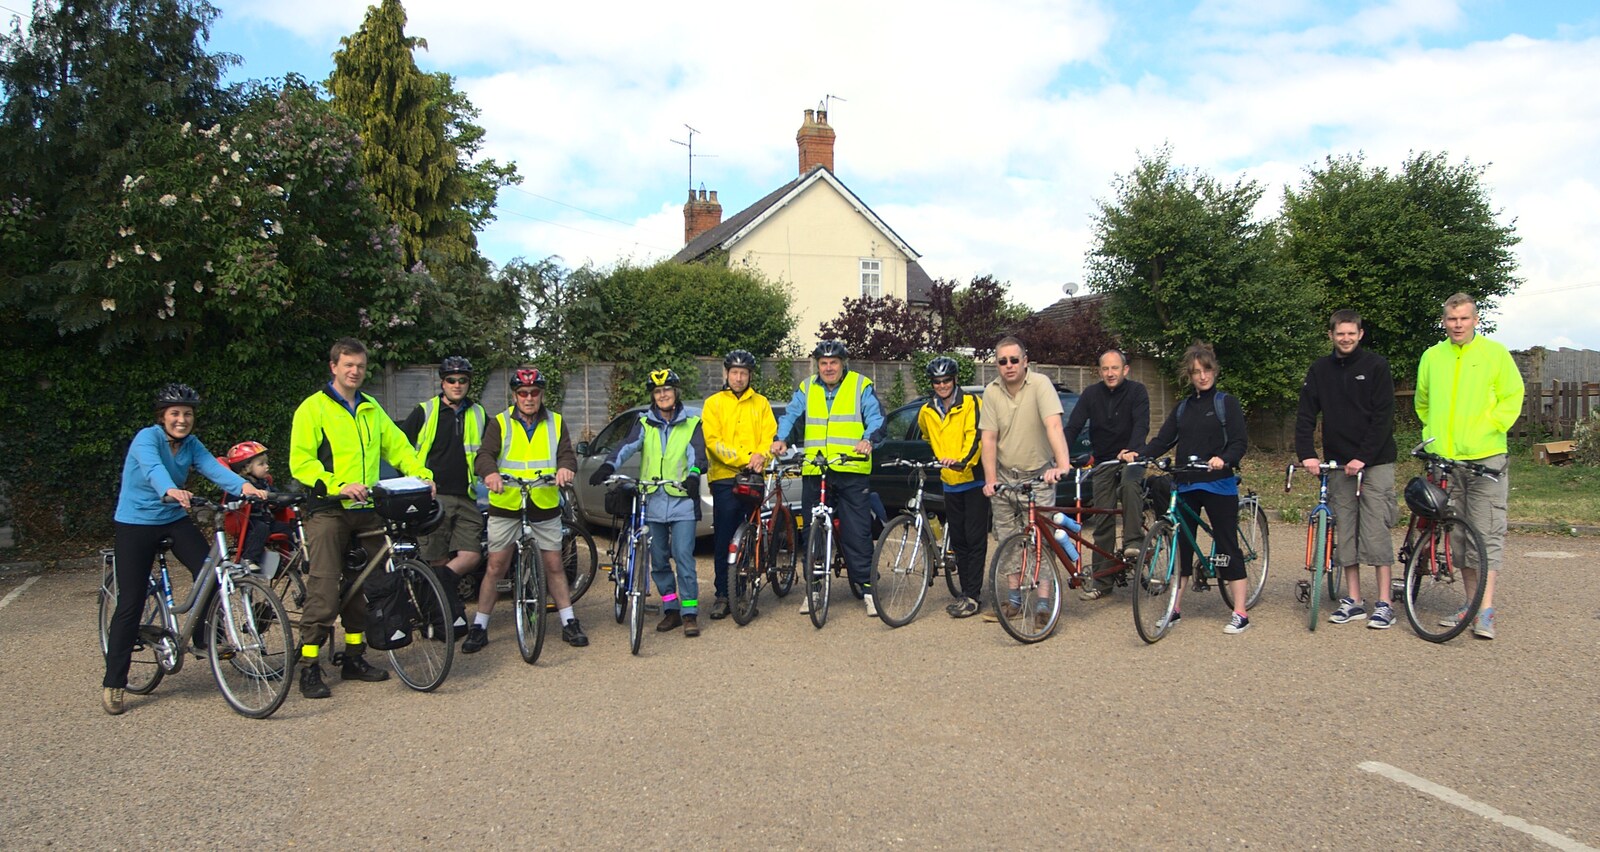 The cycle group before the off from The BSCC Weekend at Rutland Water, Empingham, Rutland - 14th May 2011